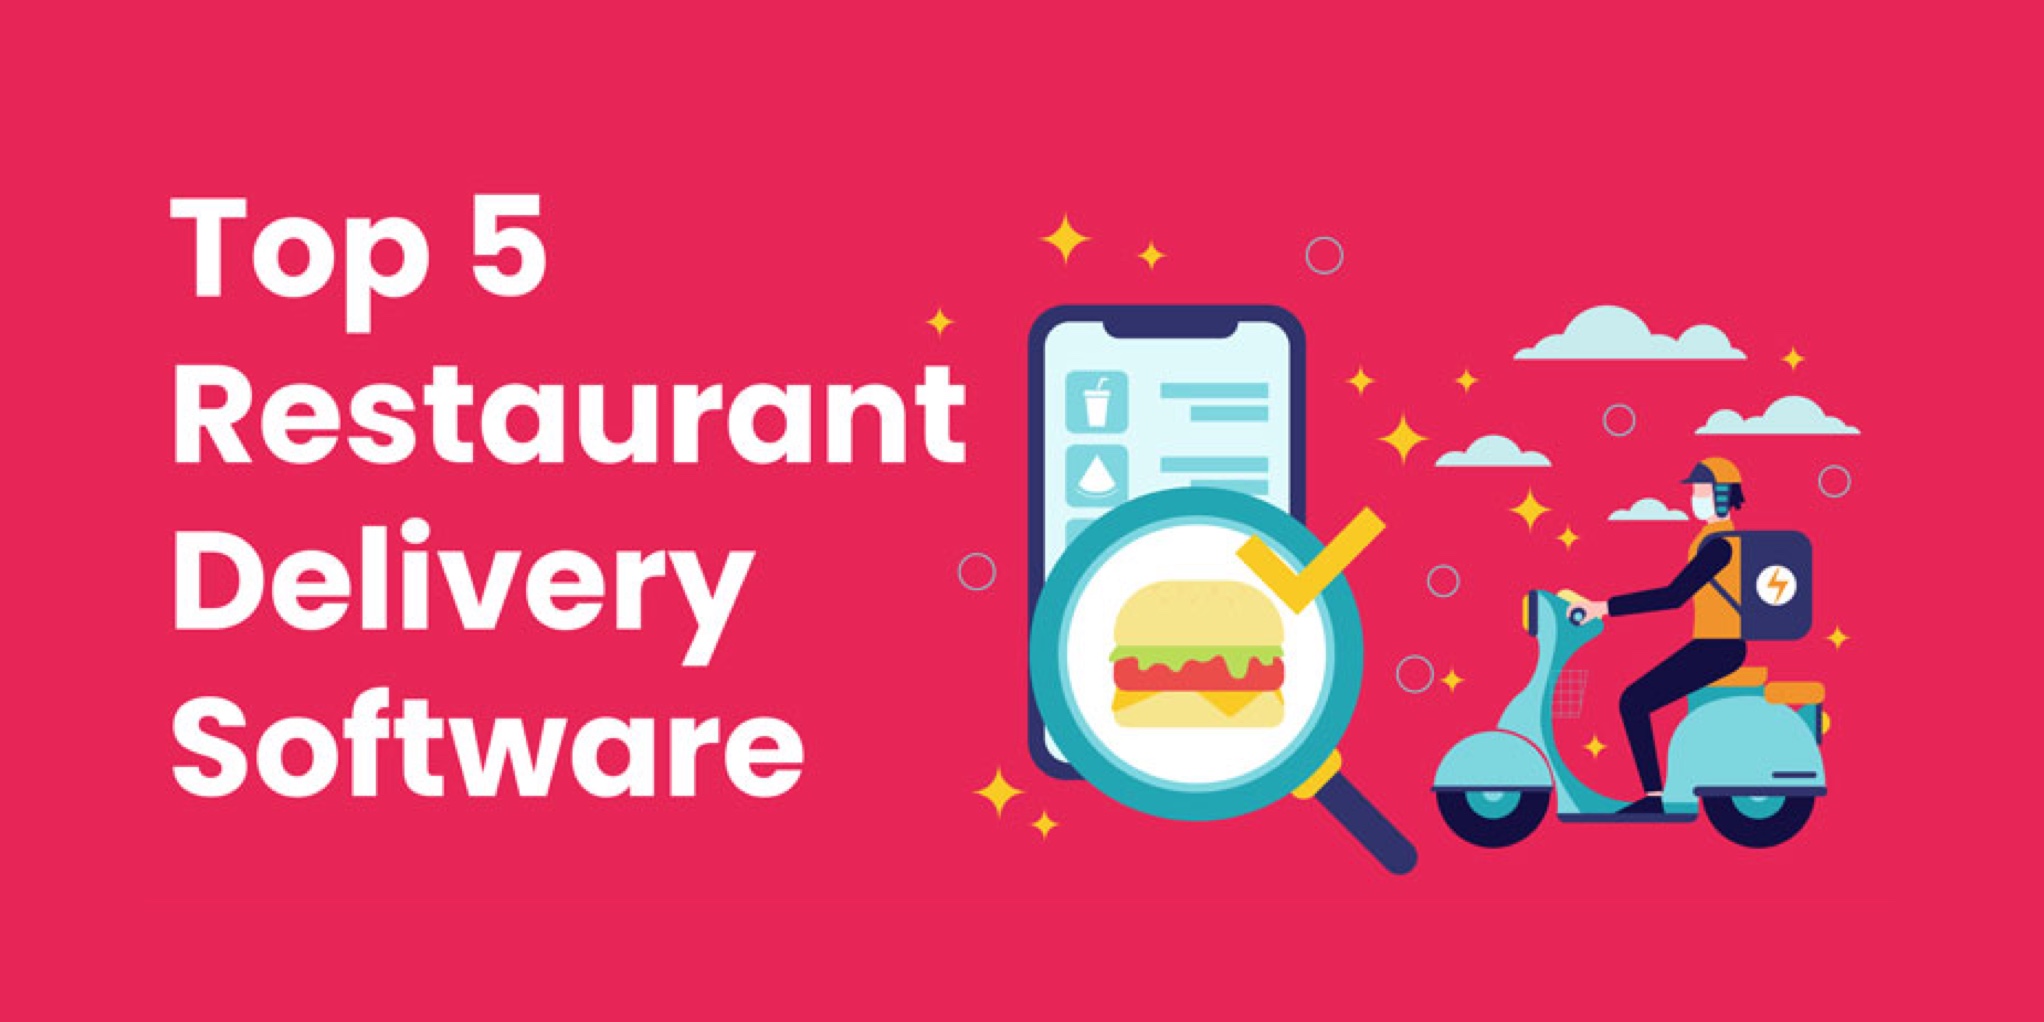 Top 5 Restaurant Delivery Software - Infographics